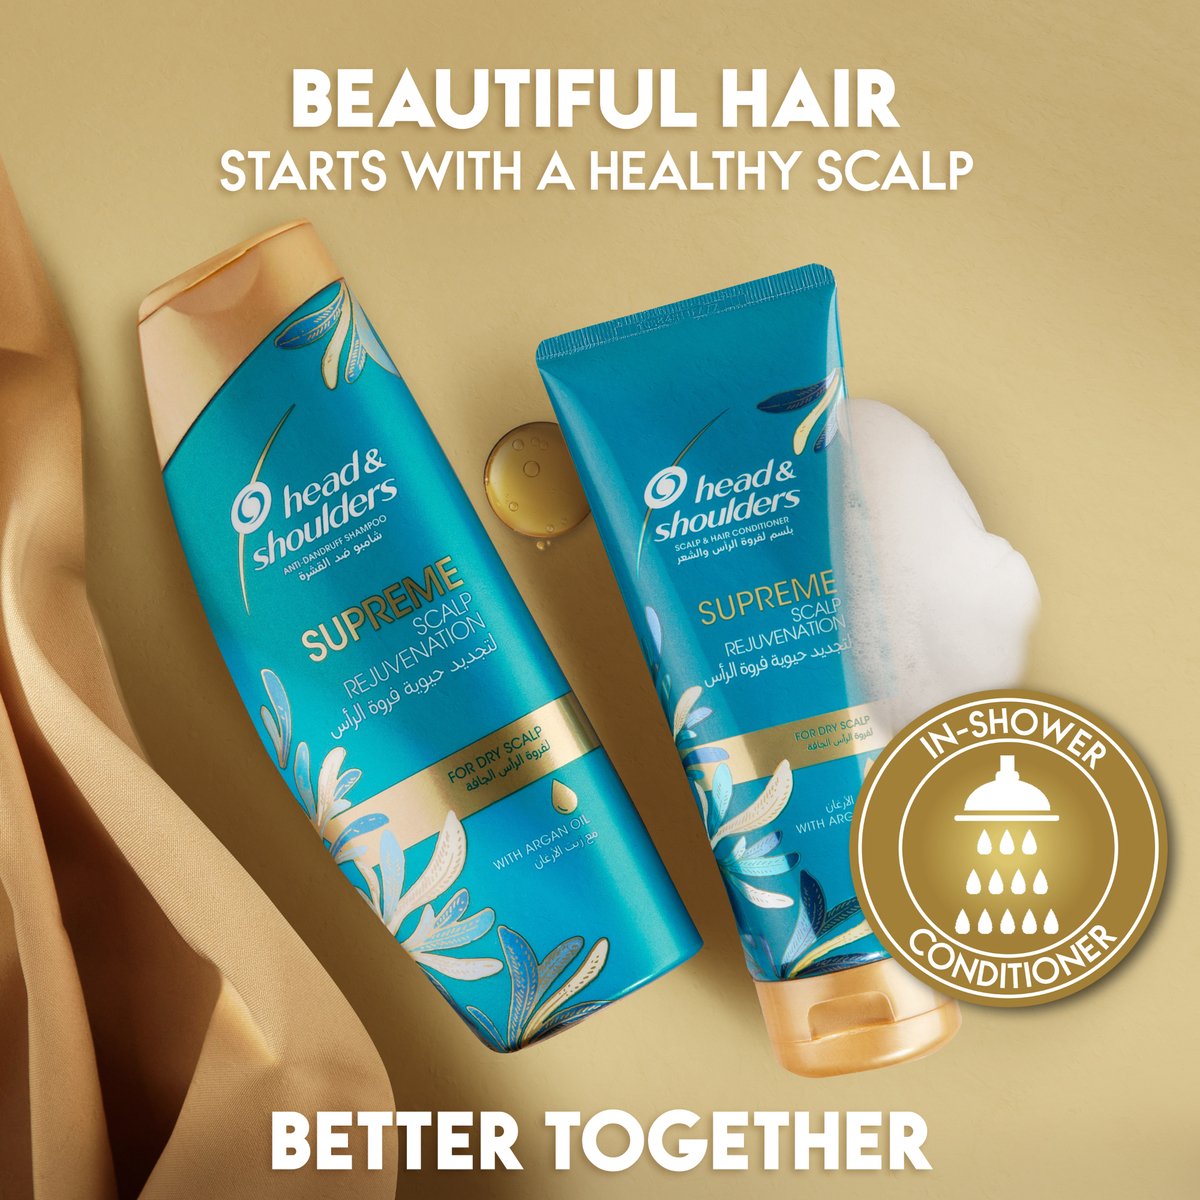 Head & Shoulders Supreme Scalp and Hair Conditioner with Argan Oil for Dry Scalp Rejuvenation 200 ml